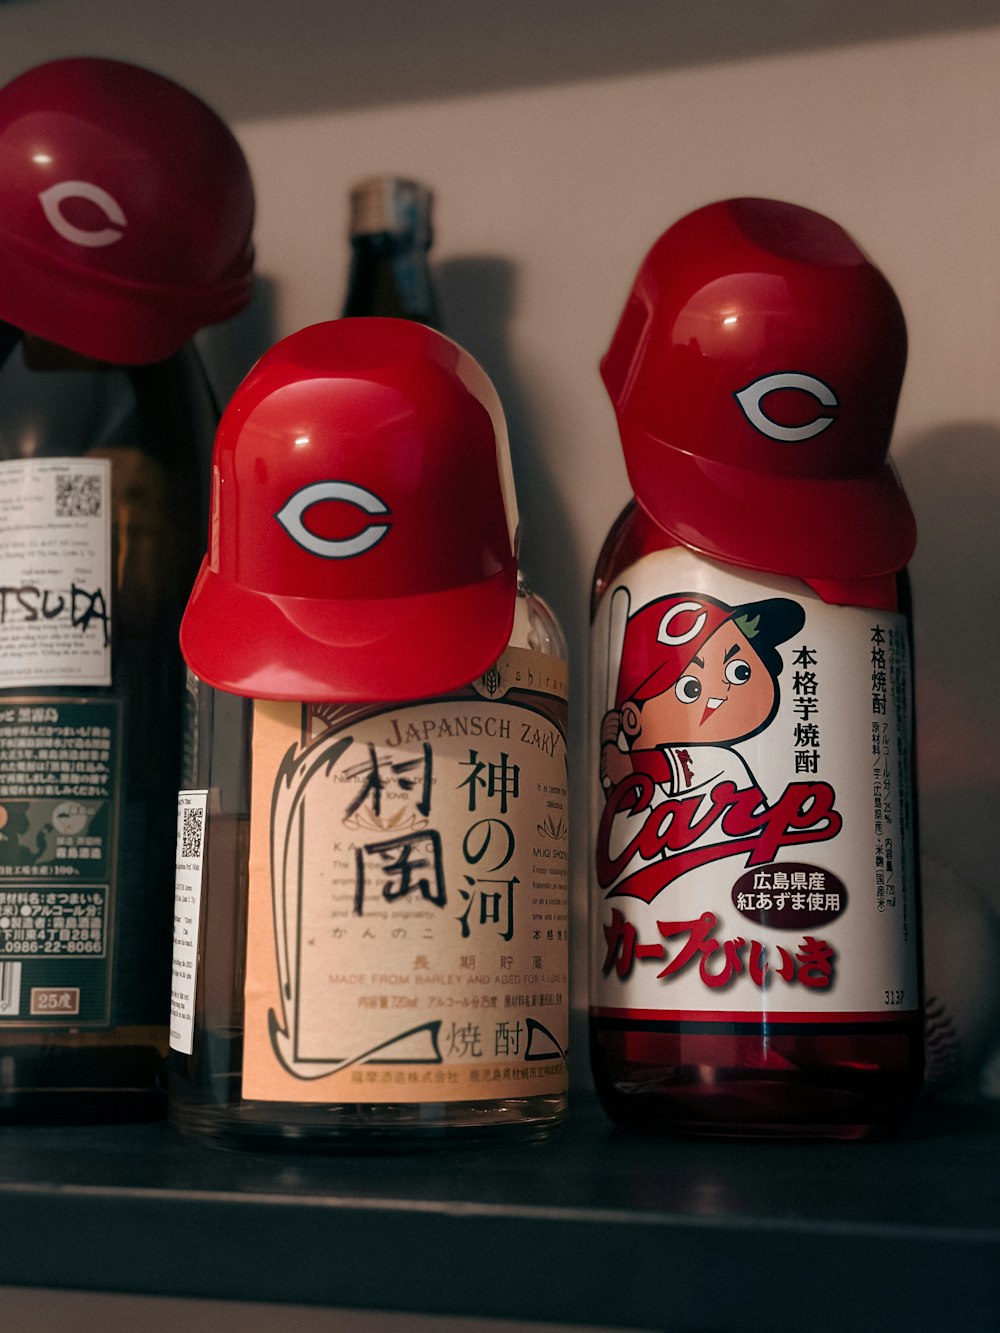 a shelf filled with bottles of liquor and baseball caps